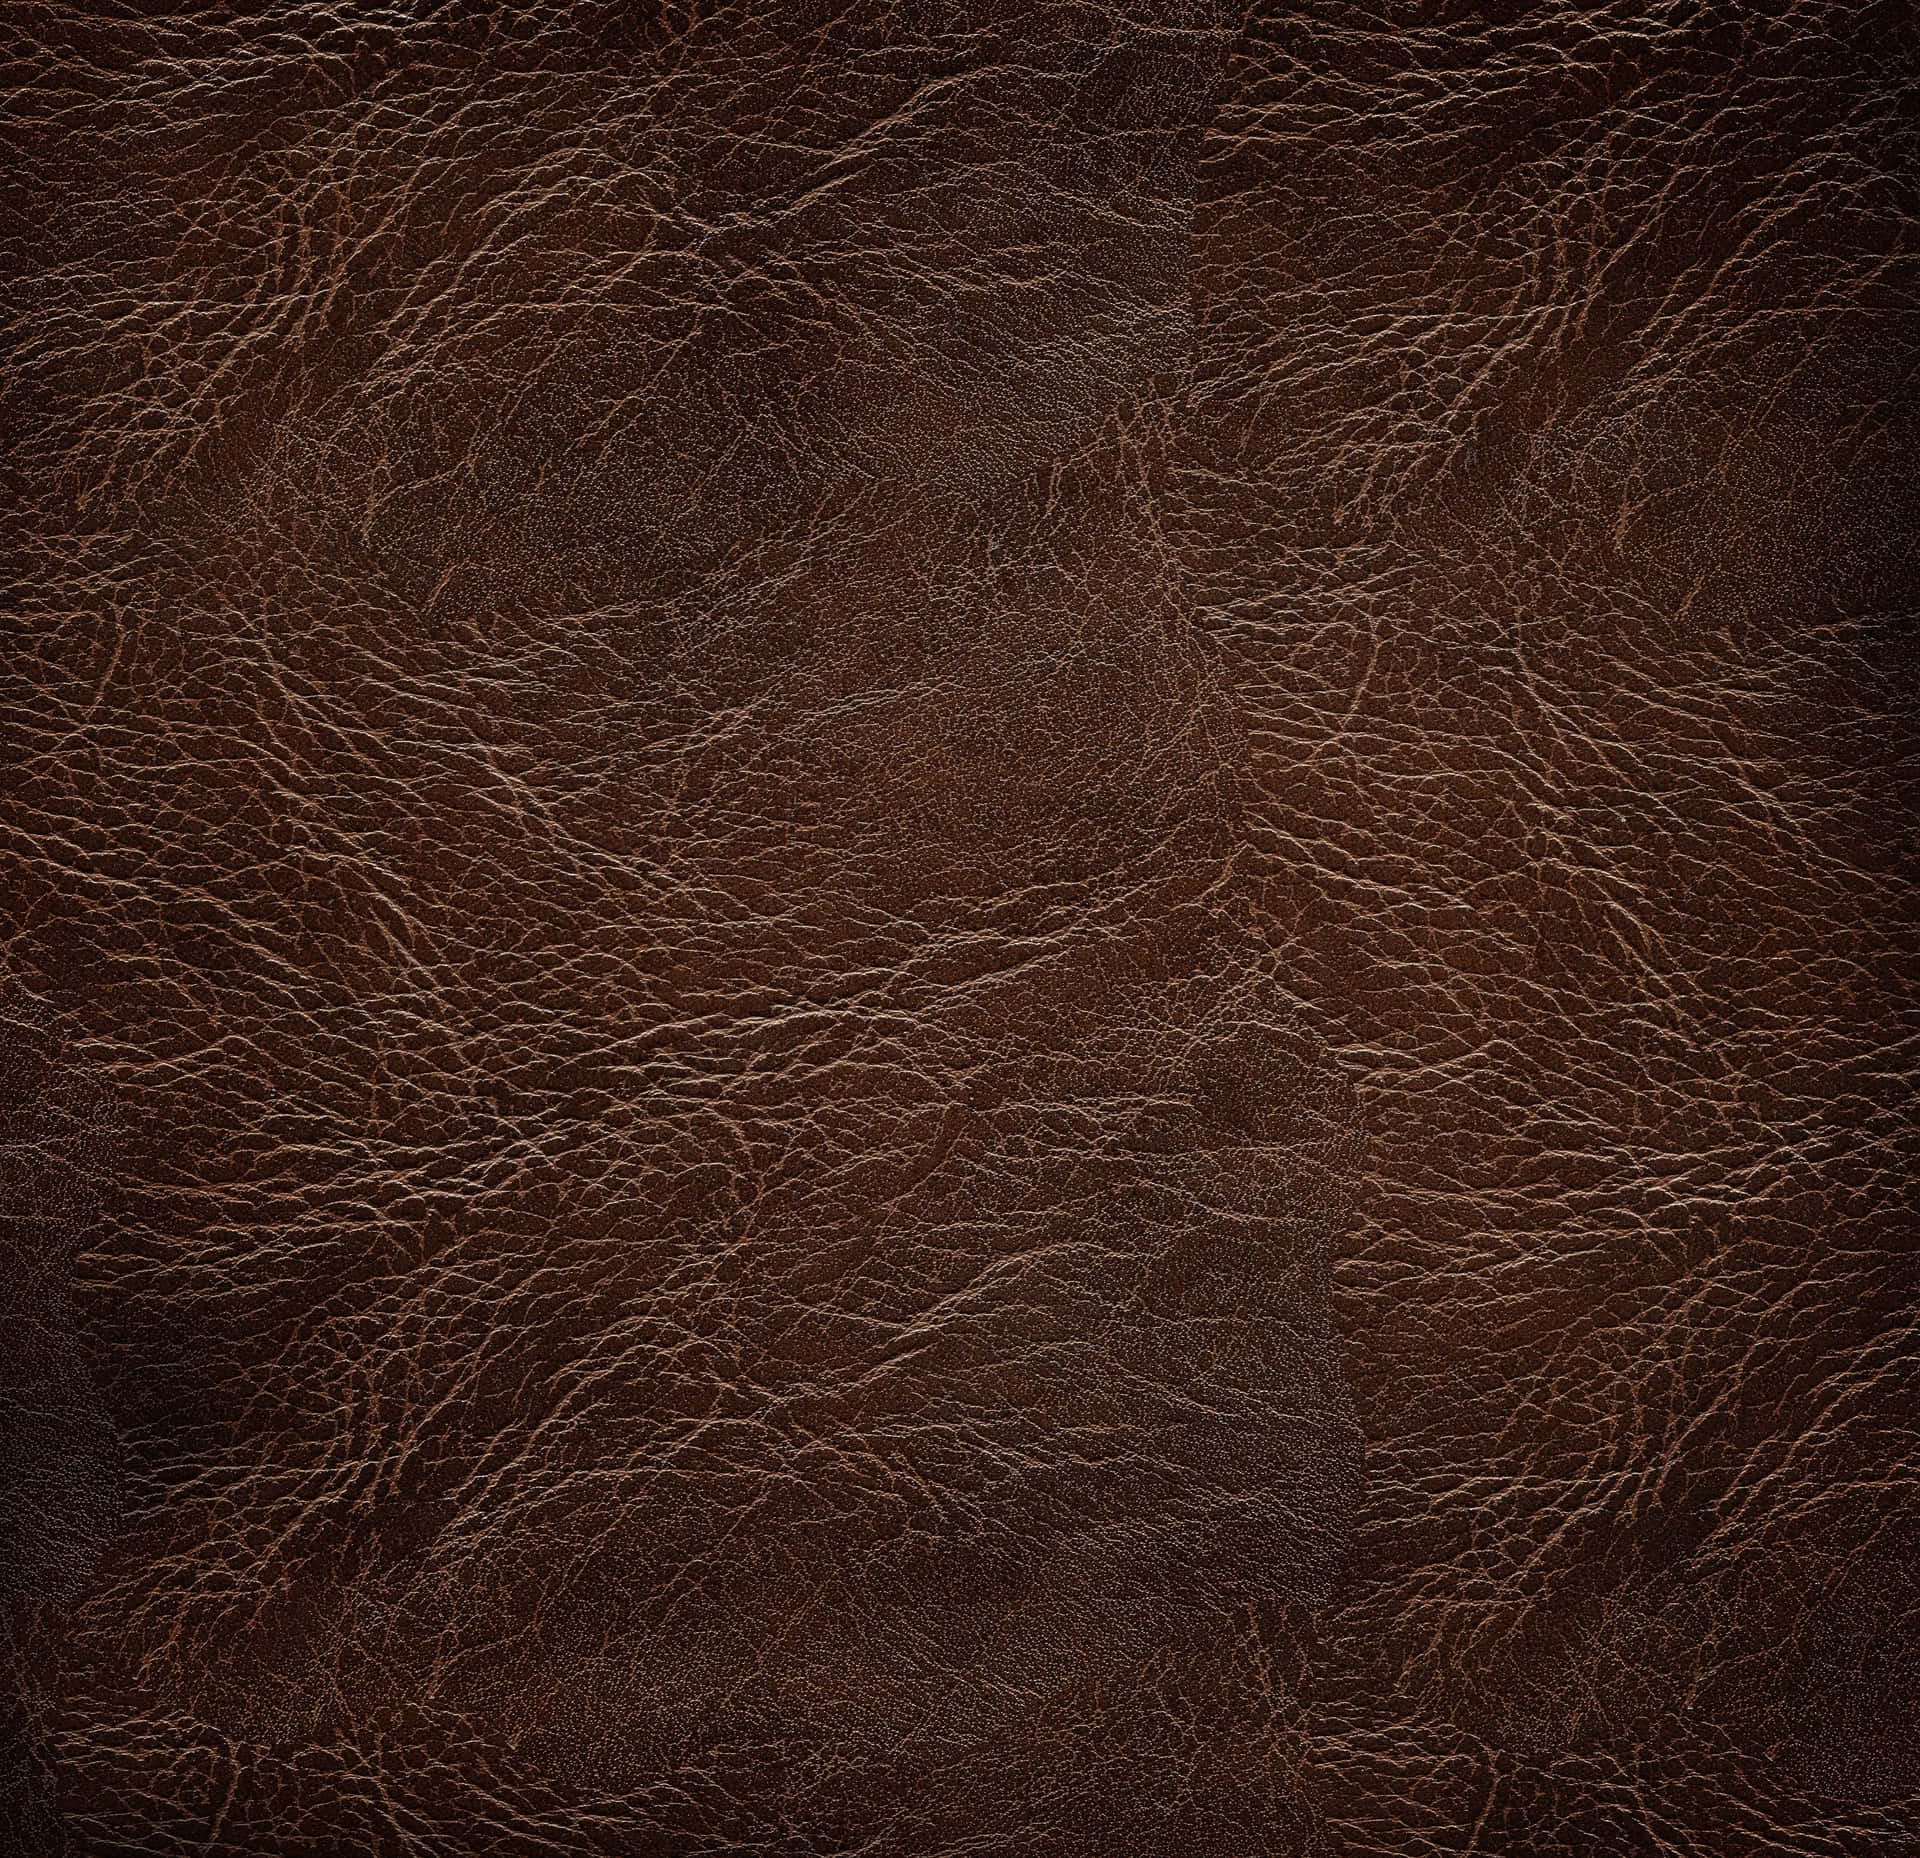 Free Leather Texture Wallpaper Downloads, [100+] Leather Texture Wallpapers  for FREE 